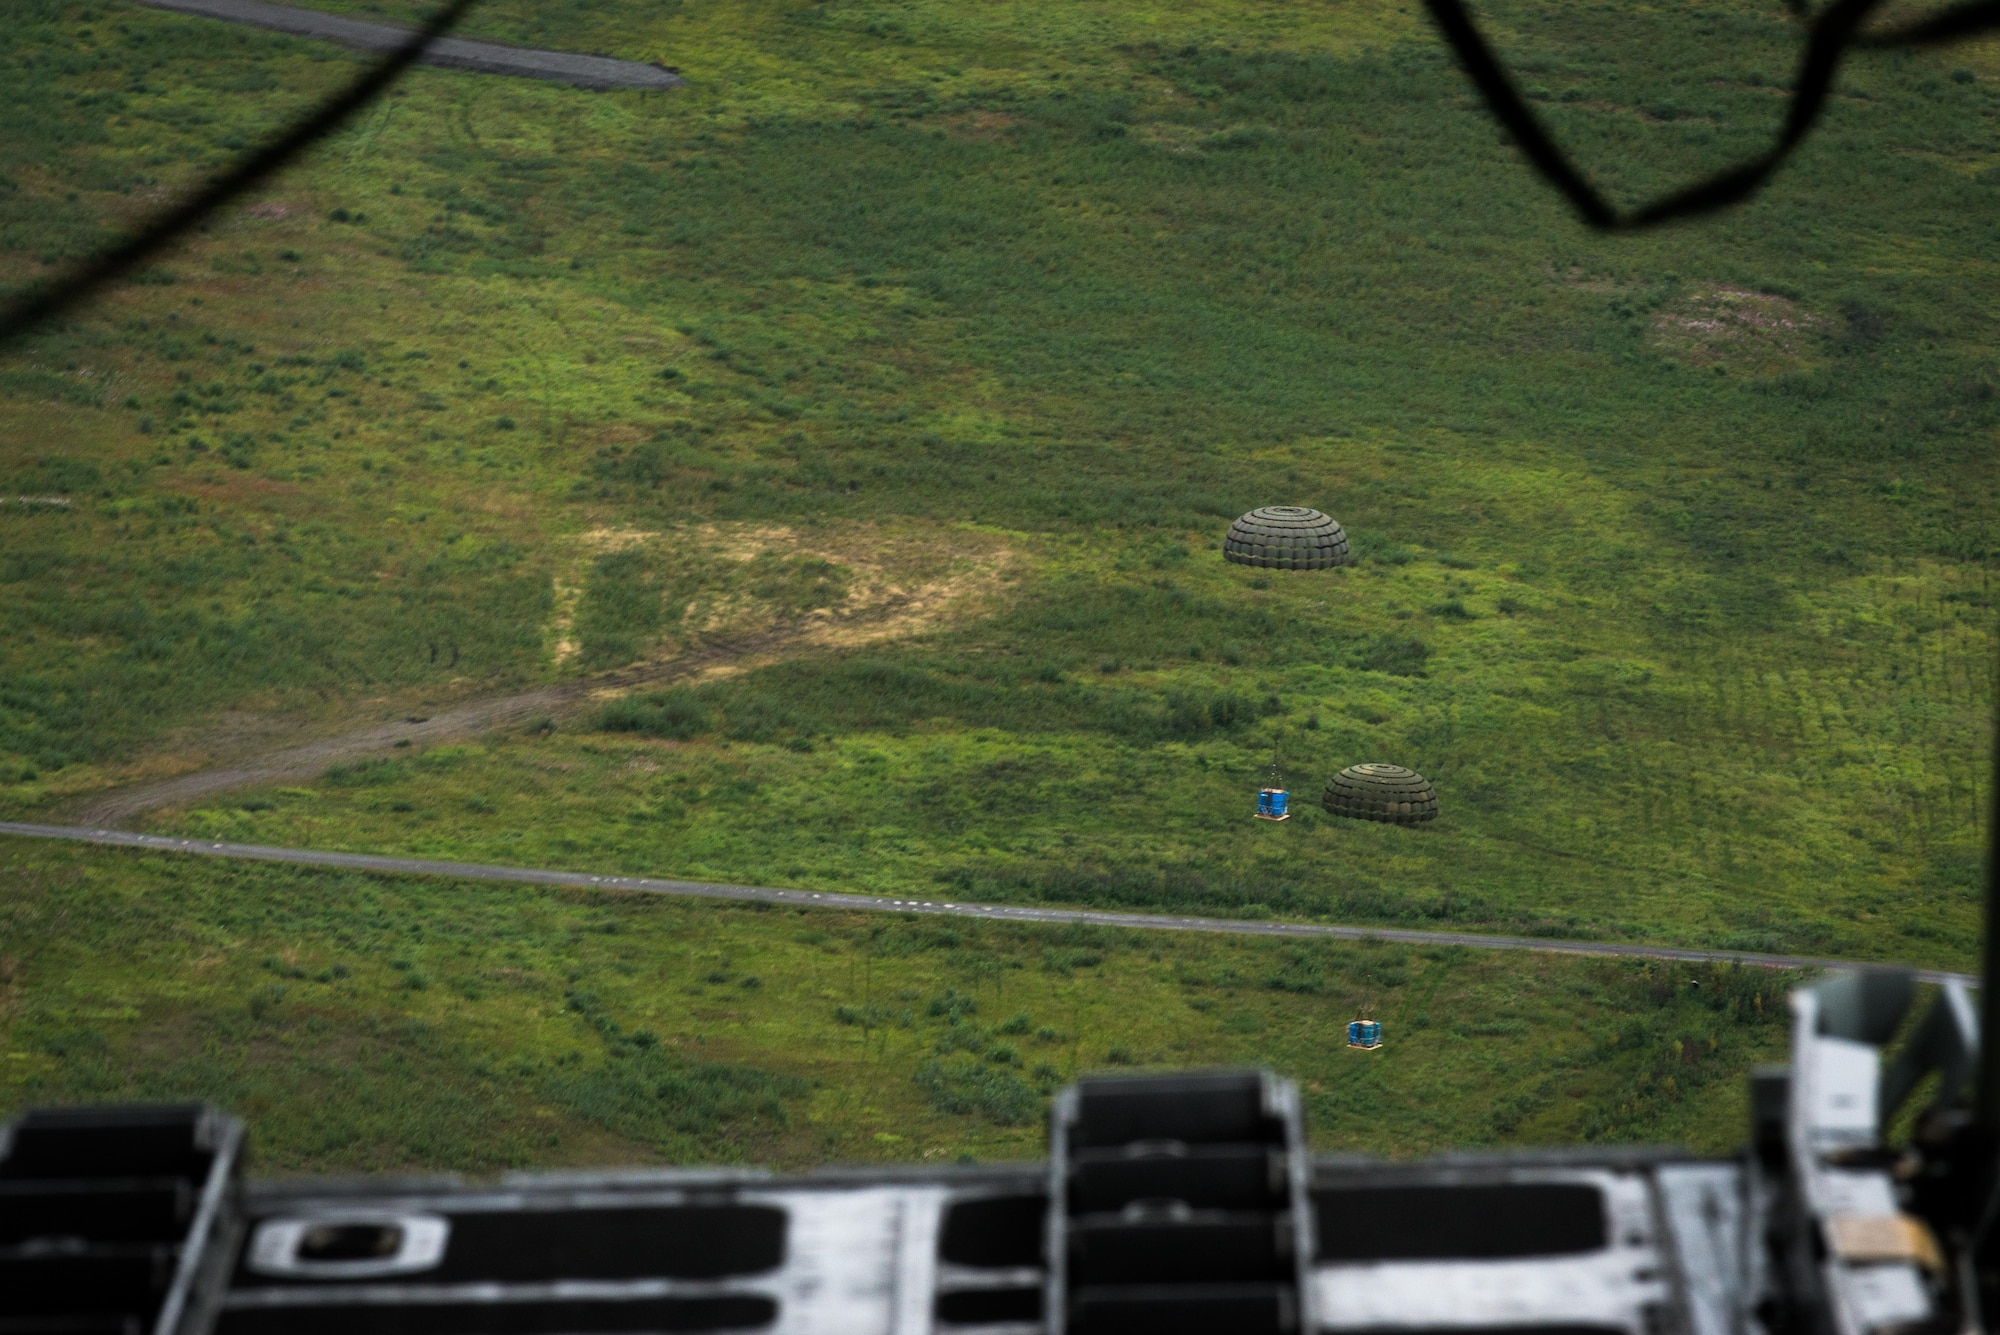 Container delivery system bundles dropped from a C-130 Hercules fall to the drop zone during Red Flag Alaska on Joint Base Elmendorf-Richardson, Alaska, Aug. 12, 2016. Bundles such as these are used to simulate airdrop procedures for supplies to ground forces. (U.S. Air Force photo by Staff Sgt. Michael Smith/Released)